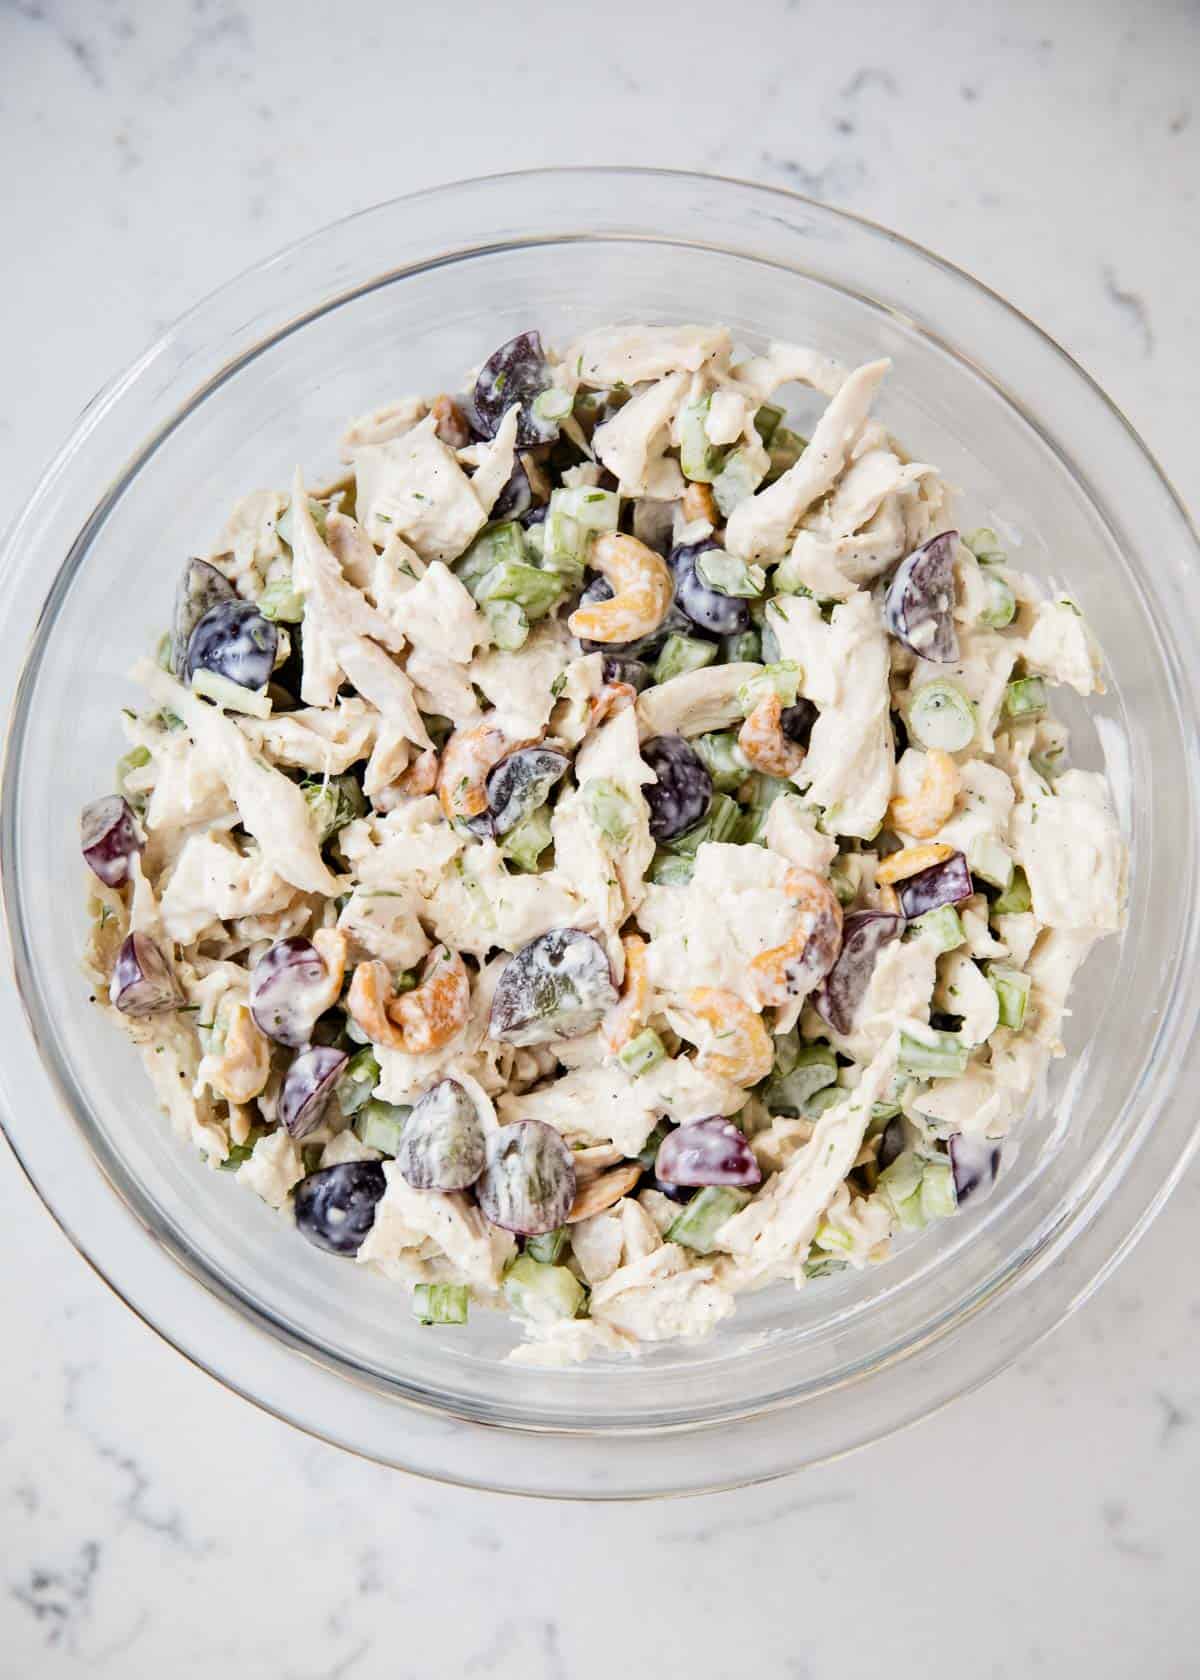 Chicken salad mixed in a glass bowl.